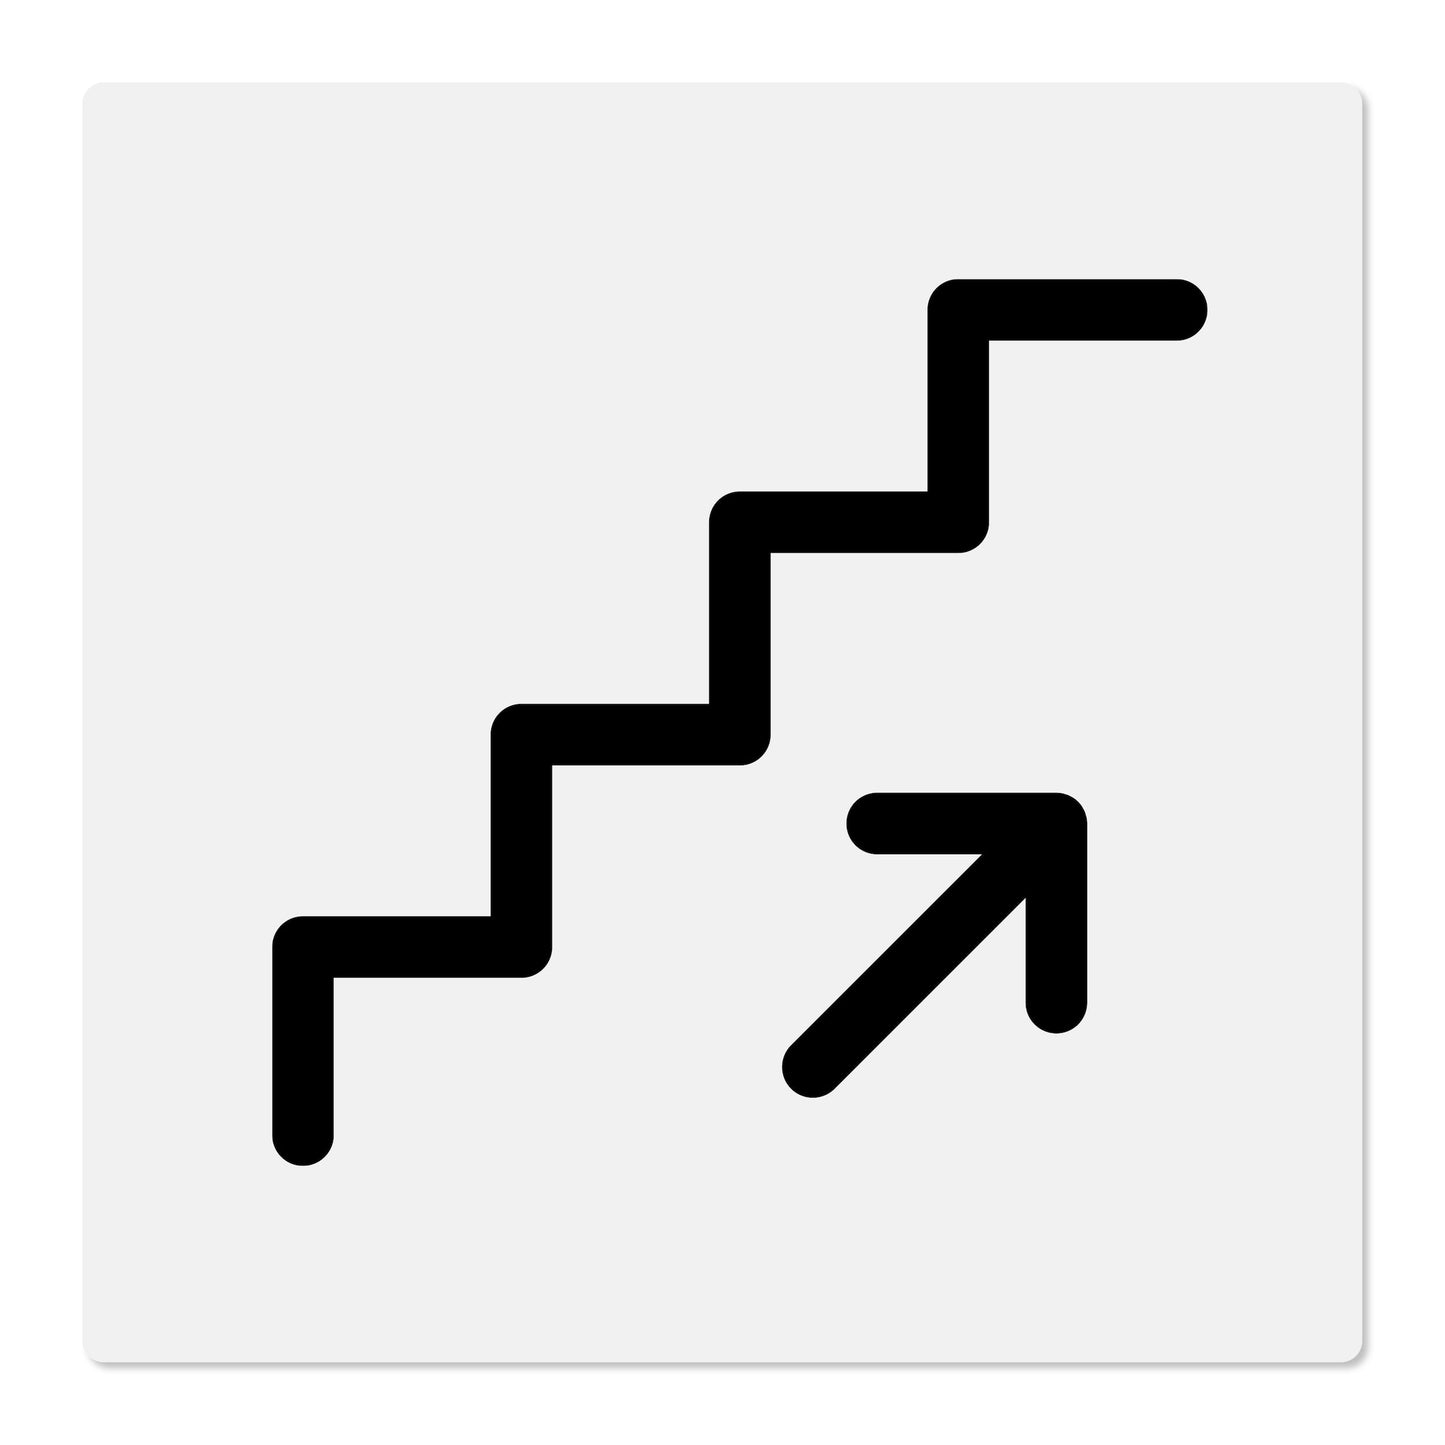 Up Stairs (Pictogram)